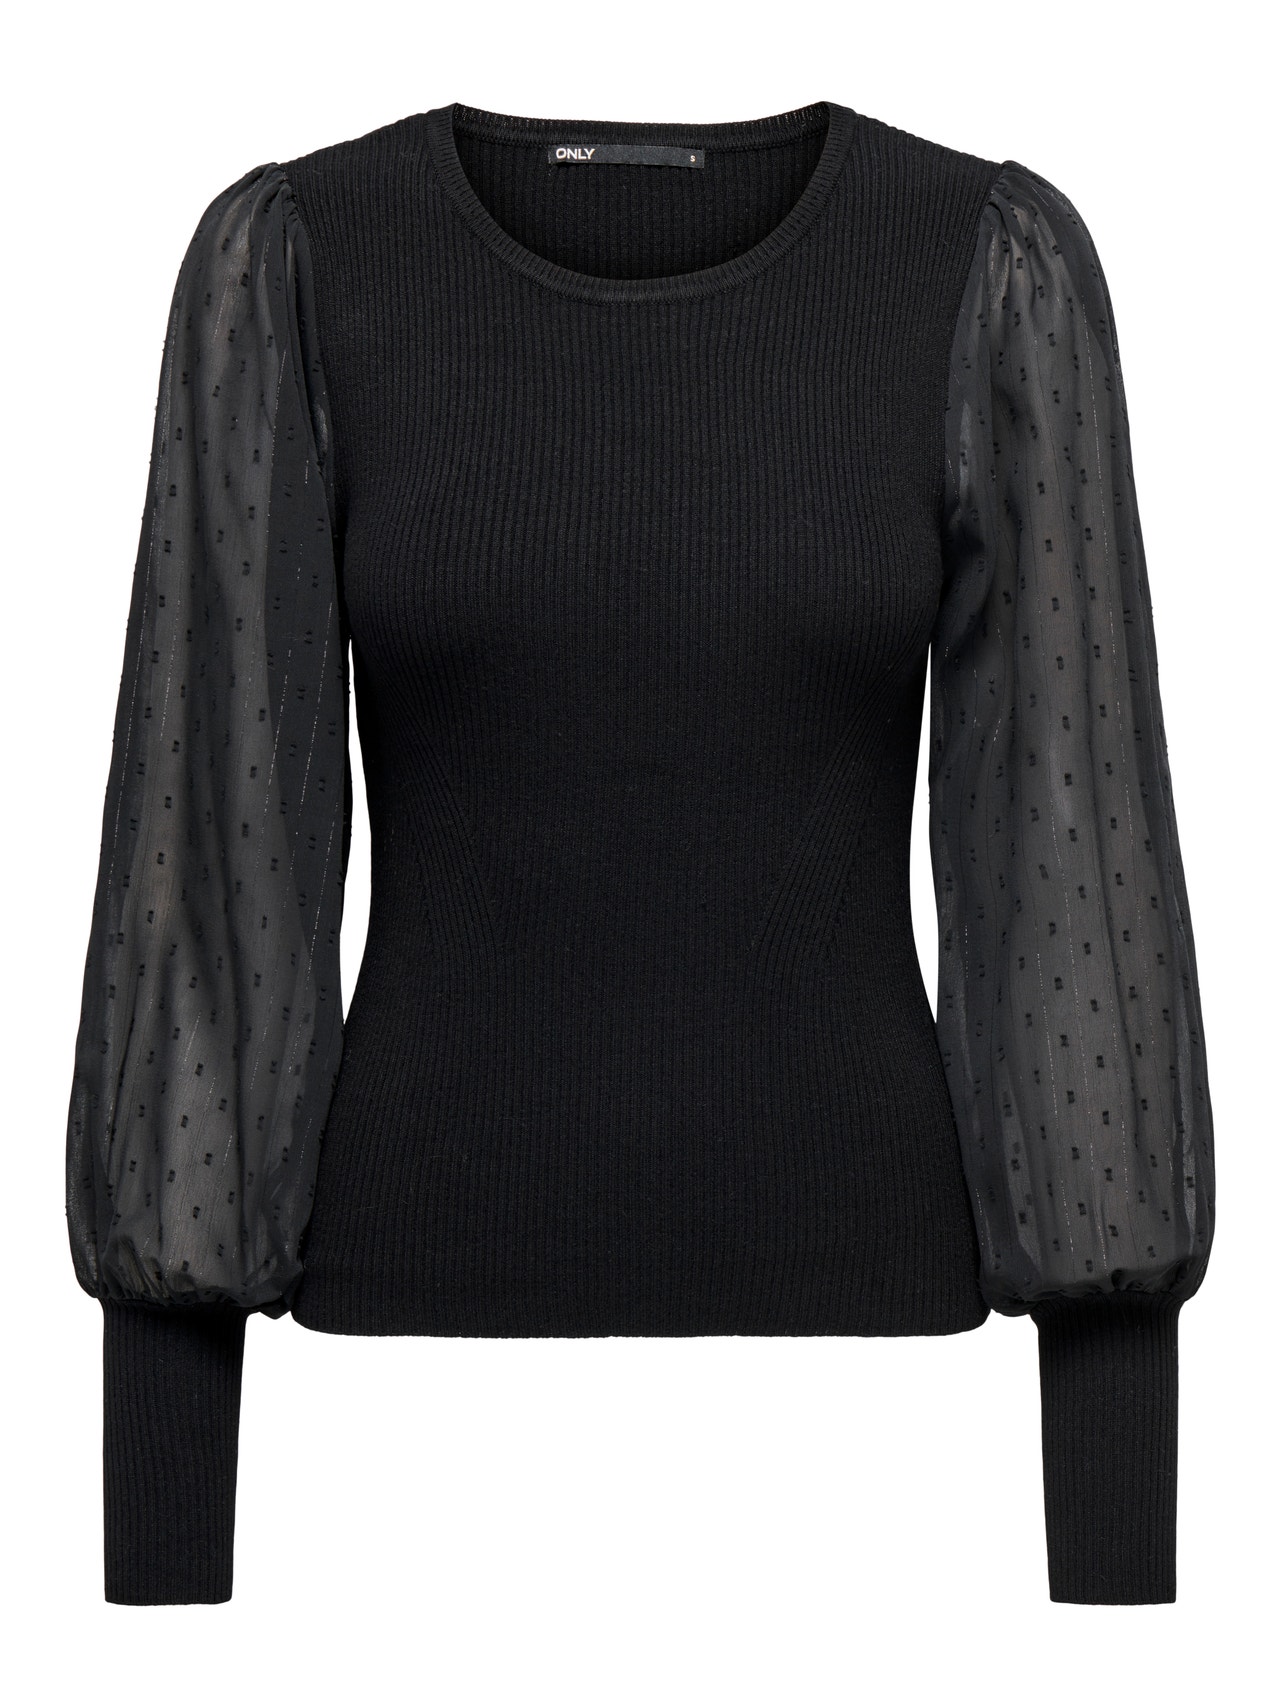 ONLY O-neck top -Black - 15302352